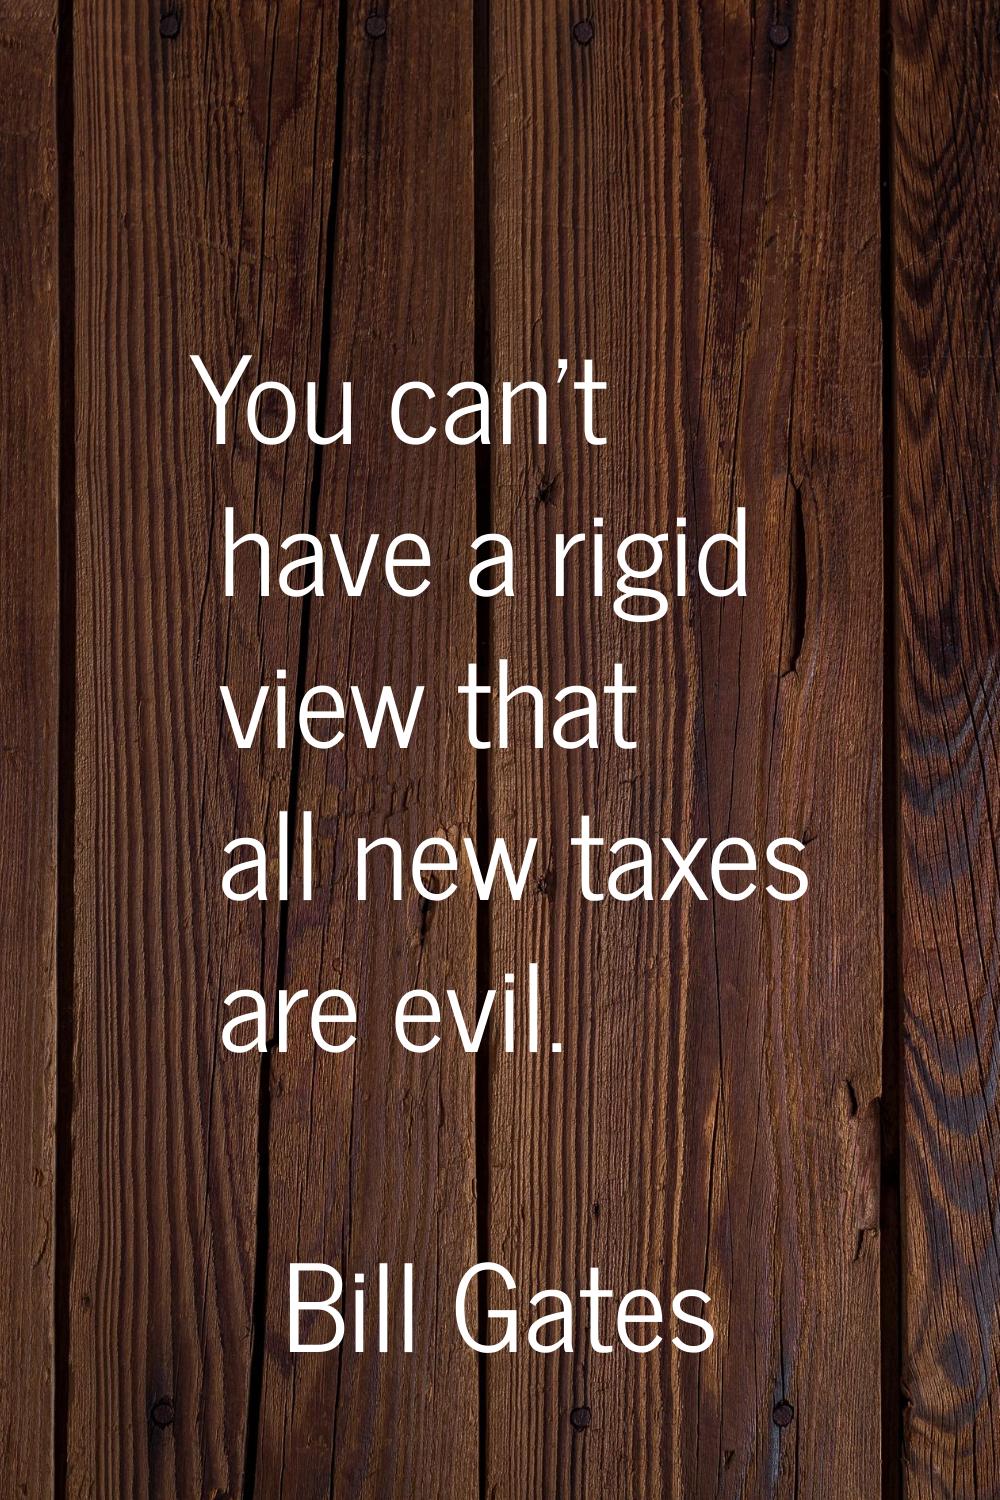 You can't have a rigid view that all new taxes are evil.